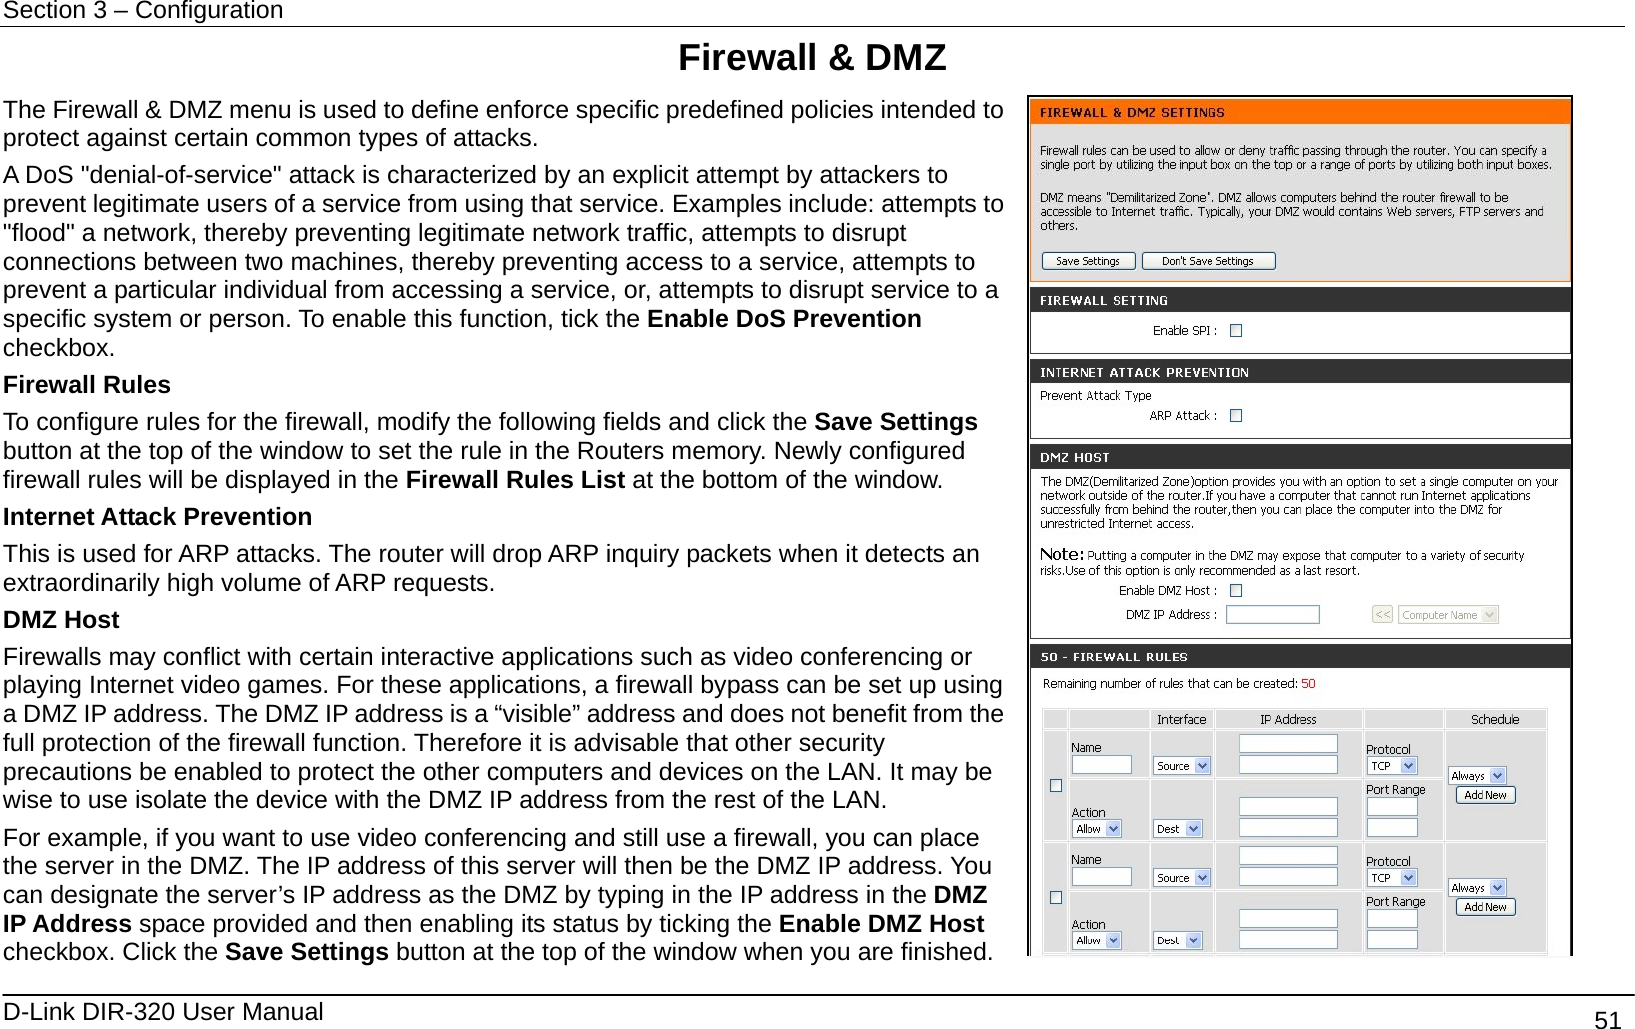 Section 3 – Configuration   D-Link DIR-320 User Manual                                       51 Firewall &amp; DMZ The Firewall &amp; DMZ menu is used to define enforce specific predefined policies intended to protect against certain common types of attacks.   A DoS &quot;denial-of-service&quot; attack is characterized by an explicit attempt by attackers to prevent legitimate users of a service from using that service. Examples include: attempts to &quot;flood&quot; a network, thereby preventing legitimate network traffic, attempts to disrupt connections between two machines, thereby preventing access to a service, attempts to prevent a particular individual from accessing a service, or, attempts to disrupt service to a specific system or person. To enable this function, tick the Enable DoS Prevention checkbox. Firewall Rules To configure rules for the firewall, modify the following fields and click the Save Settings button at the top of the window to set the rule in the Routers memory. Newly configured firewall rules will be displayed in the Firewall Rules List at the bottom of the window.   Internet Attack Prevention This is used for ARP attacks. The router will drop ARP inquiry packets when it detects an extraordinarily high volume of ARP requests.   DMZ Host Firewalls may conflict with certain interactive applications such as video conferencing or playing Internet video games. For these applications, a firewall bypass can be set up using a DMZ IP address. The DMZ IP address is a “visible” address and does not benefit from the full protection of the firewall function. Therefore it is advisable that other security precautions be enabled to protect the other computers and devices on the LAN. It may be wise to use isolate the device with the DMZ IP address from the rest of the LAN.   For example, if you want to use video conferencing and still use a firewall, you can place the server in the DMZ. The IP address of this server will then be the DMZ IP address. You can designate the server’s IP address as the DMZ by typing in the IP address in the DMZ IP Address space provided and then enabling its status by ticking the Enable DMZ Host checkbox. Click the Save Settings button at the top of the window when you are finished.   